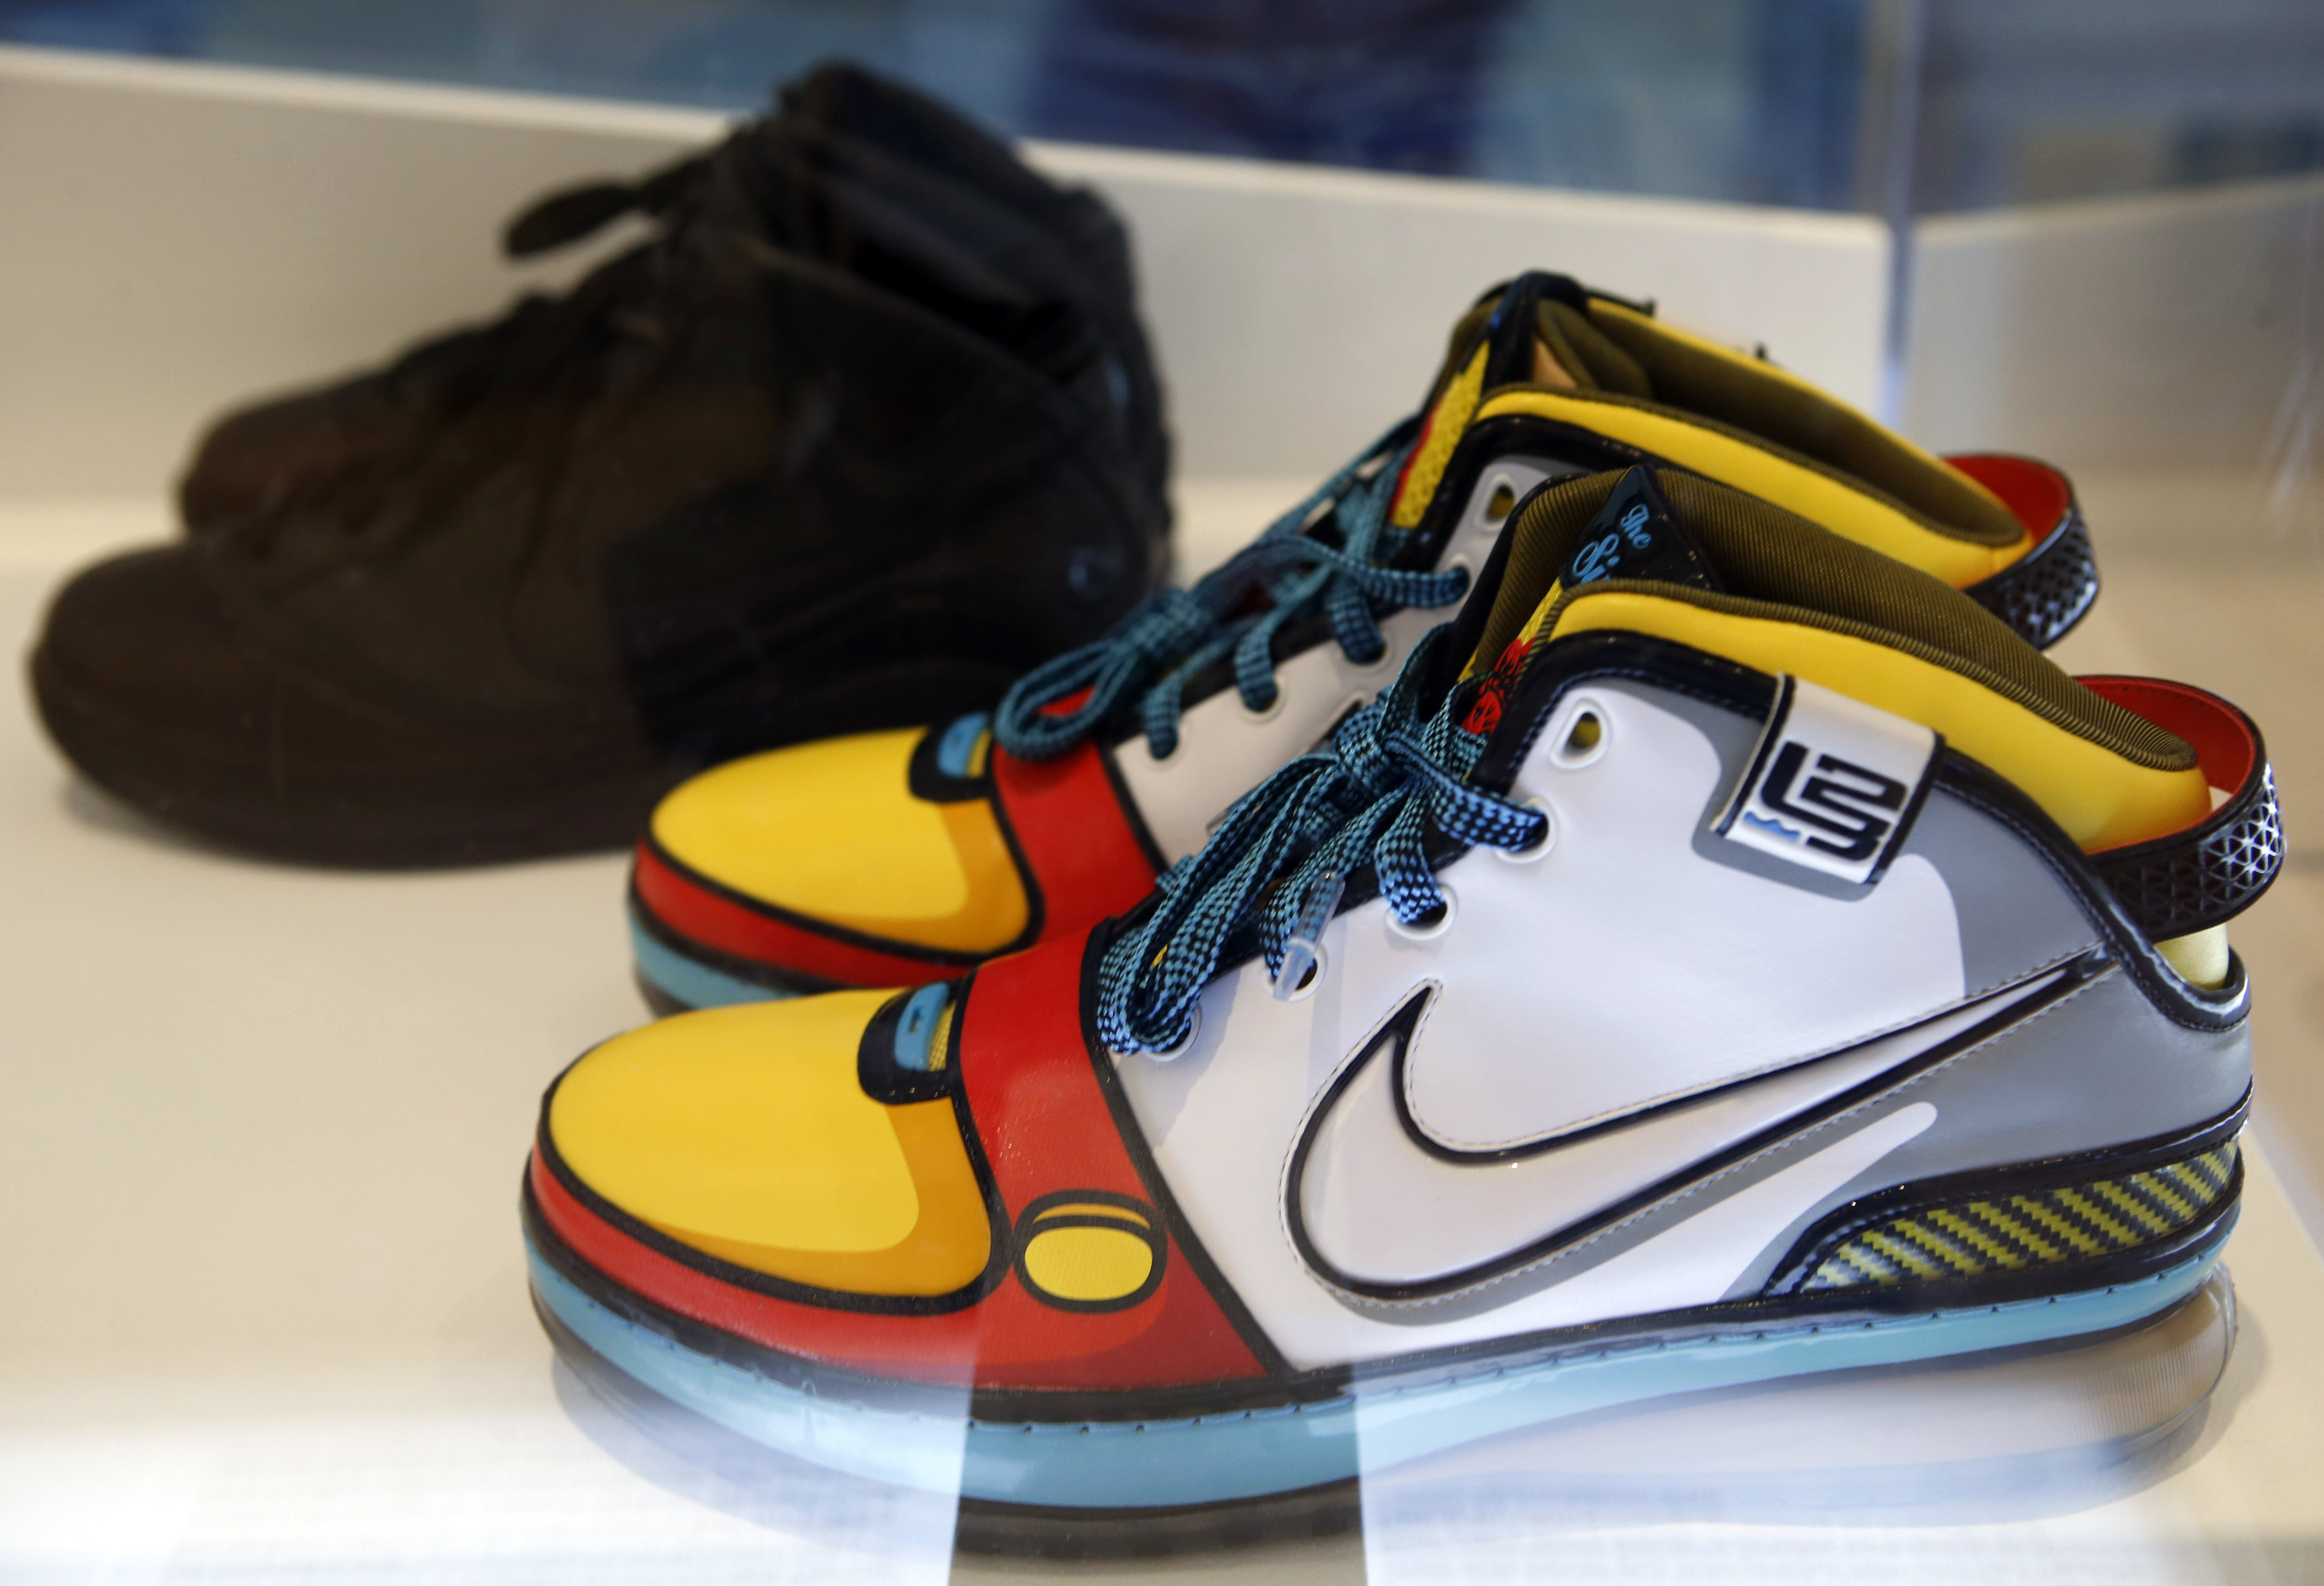 Bold graphics and cartoon-like colours are featured on a rare pair of 2009 sneakers, inspired by Stewie Griffin, LeBron James's favourite character from the animated television show Family Guy, displayed as part of the Out of the Box: The Rise of Sneaker Culture exhibition. 